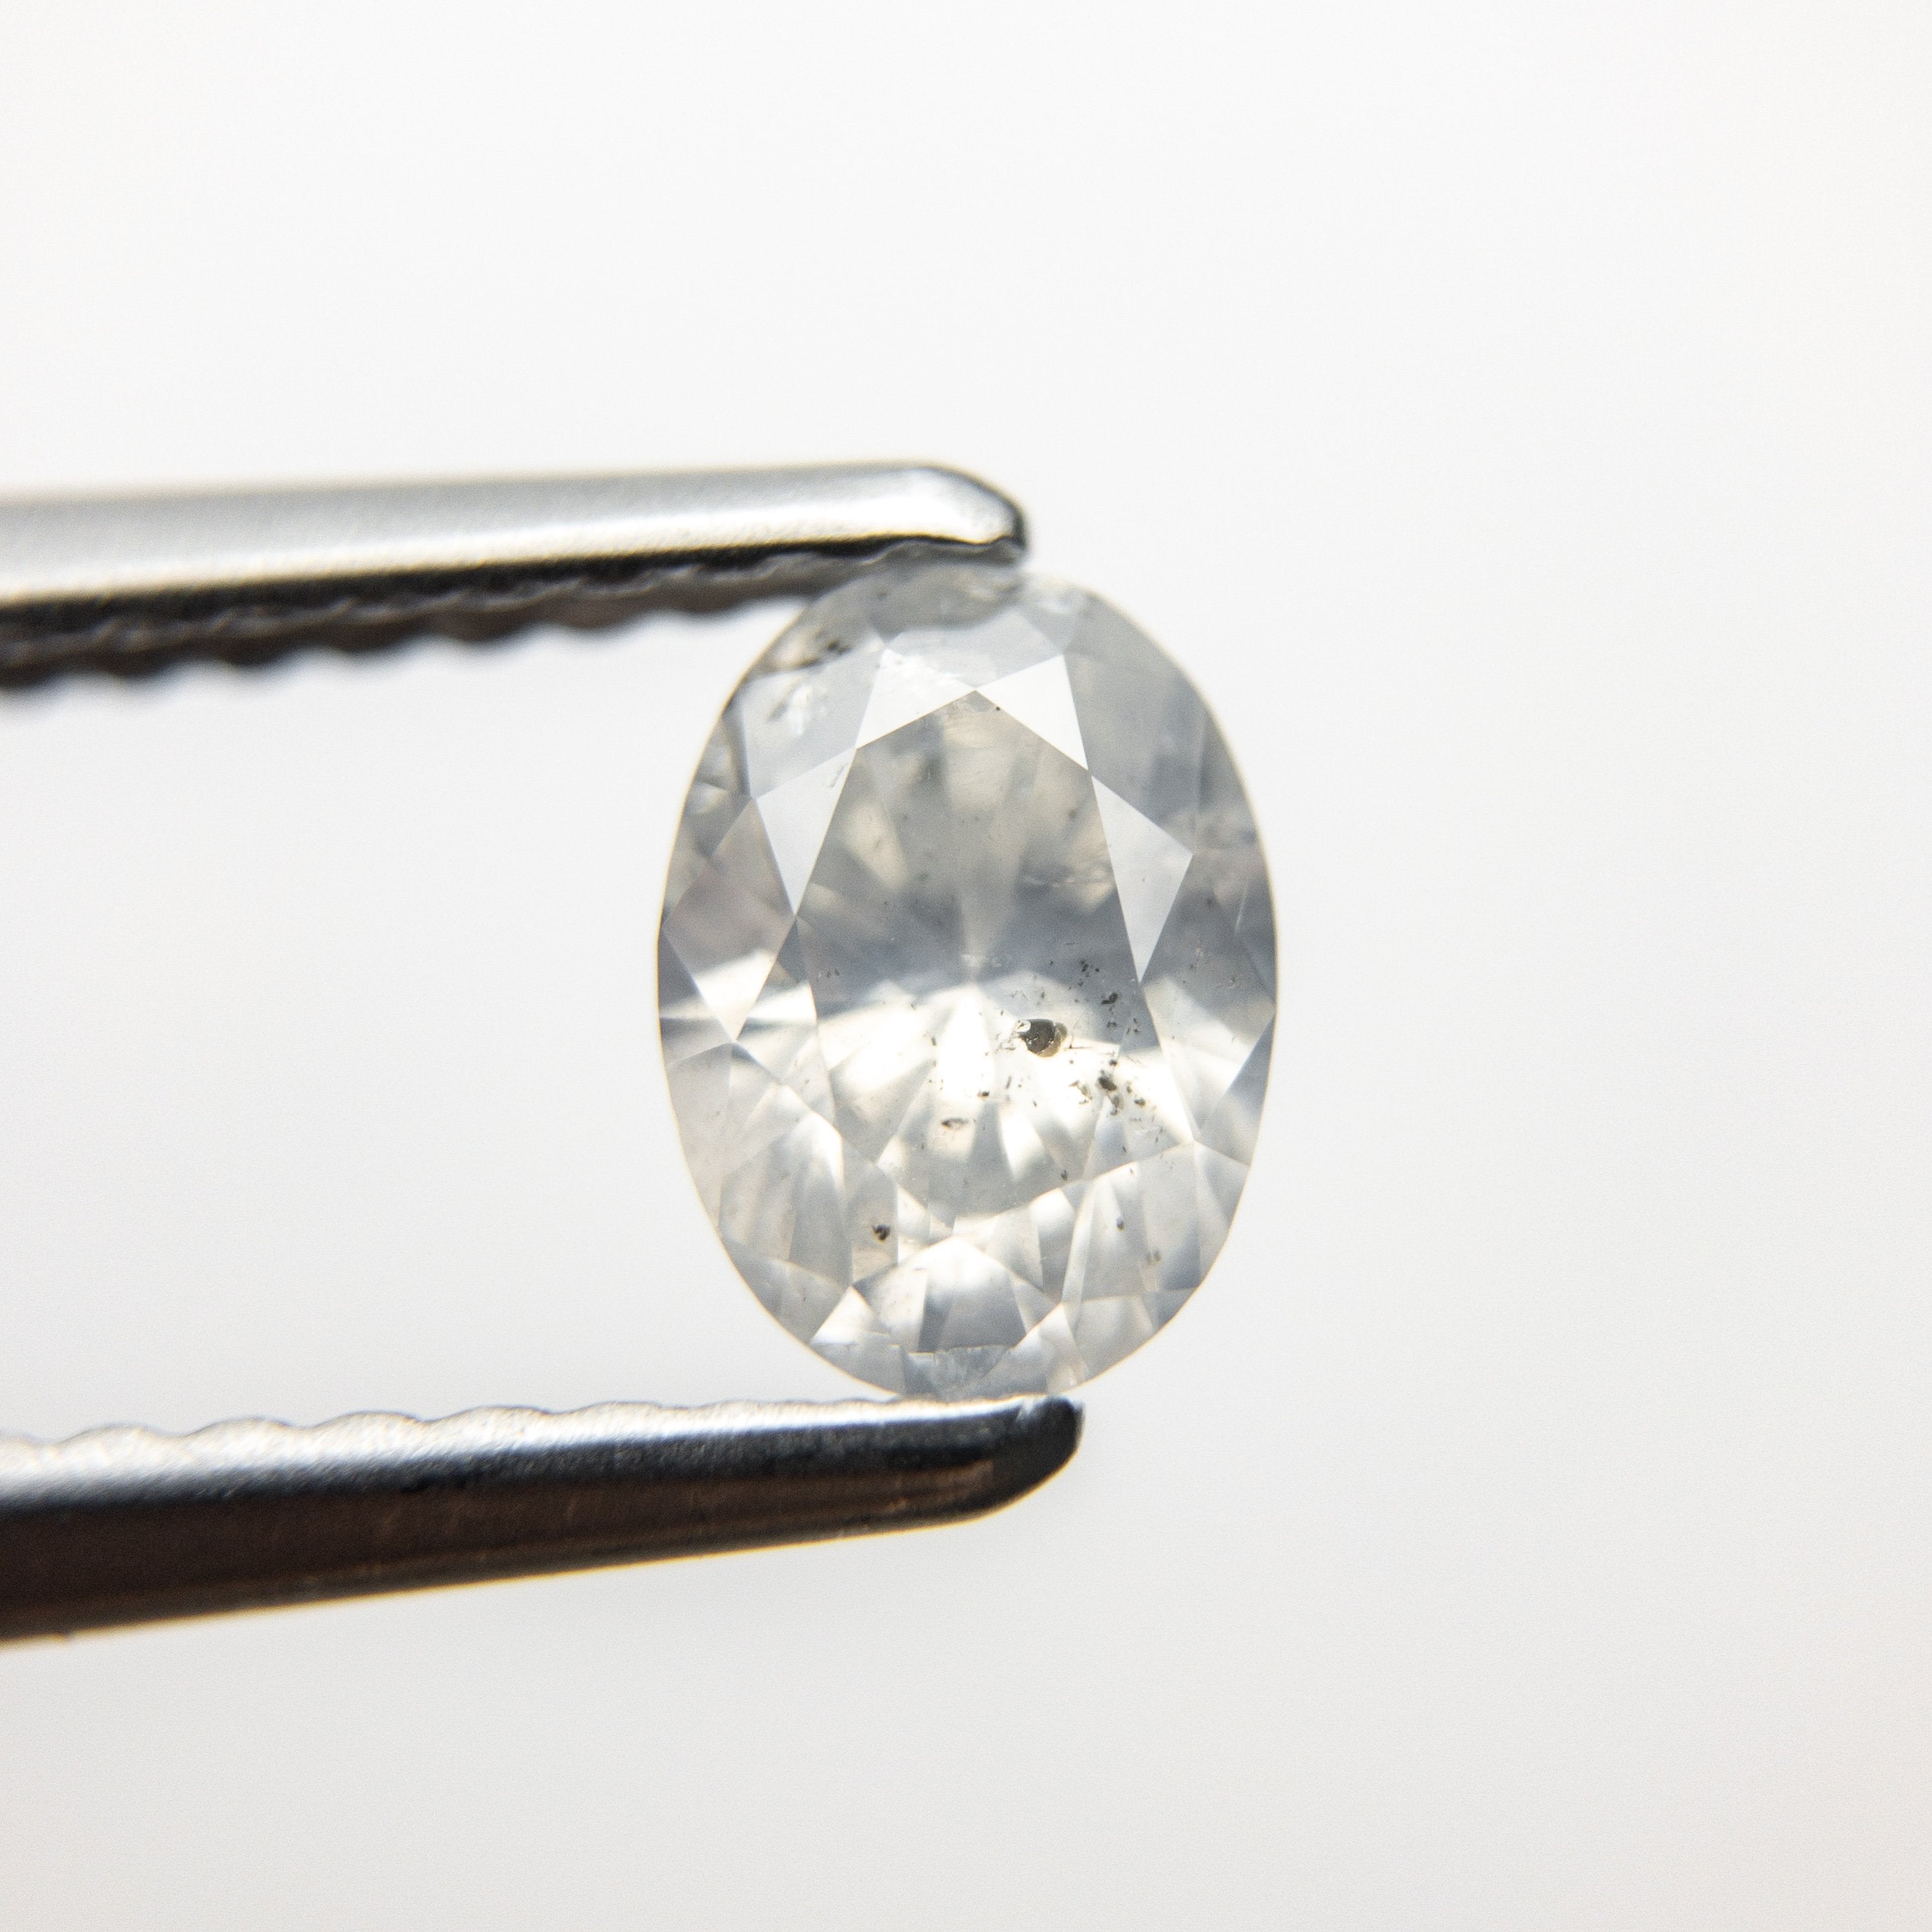 0.55ct 6.19x4.56x3.02mm Oval Brilliant 18361-06 hold D1688